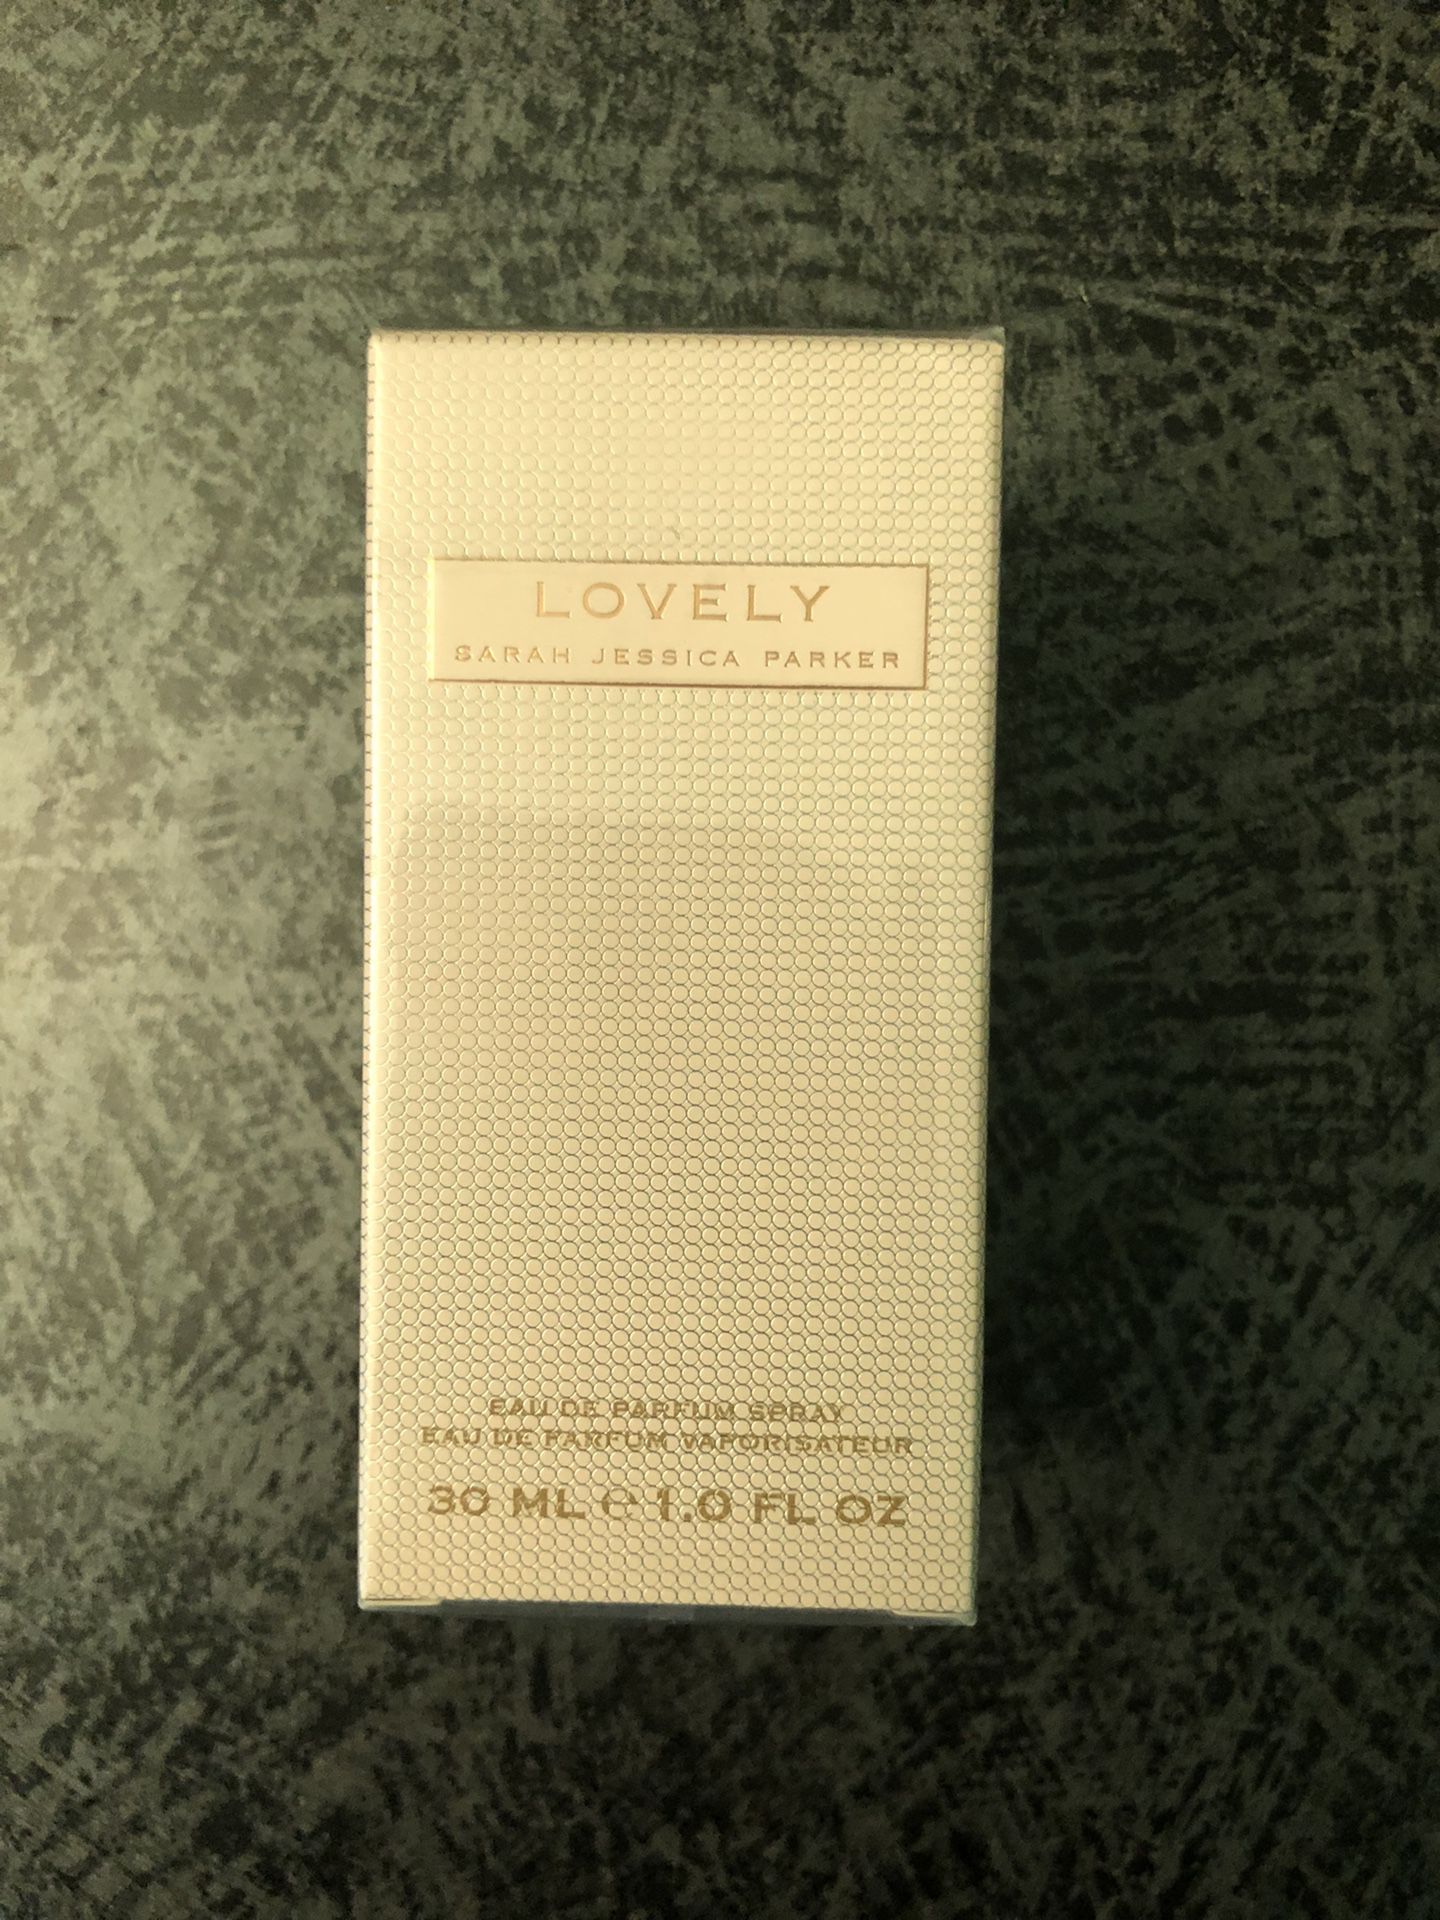 Lovely by Sarah Jessica Parker (EDP, 1oz) - Brand New & Boxed